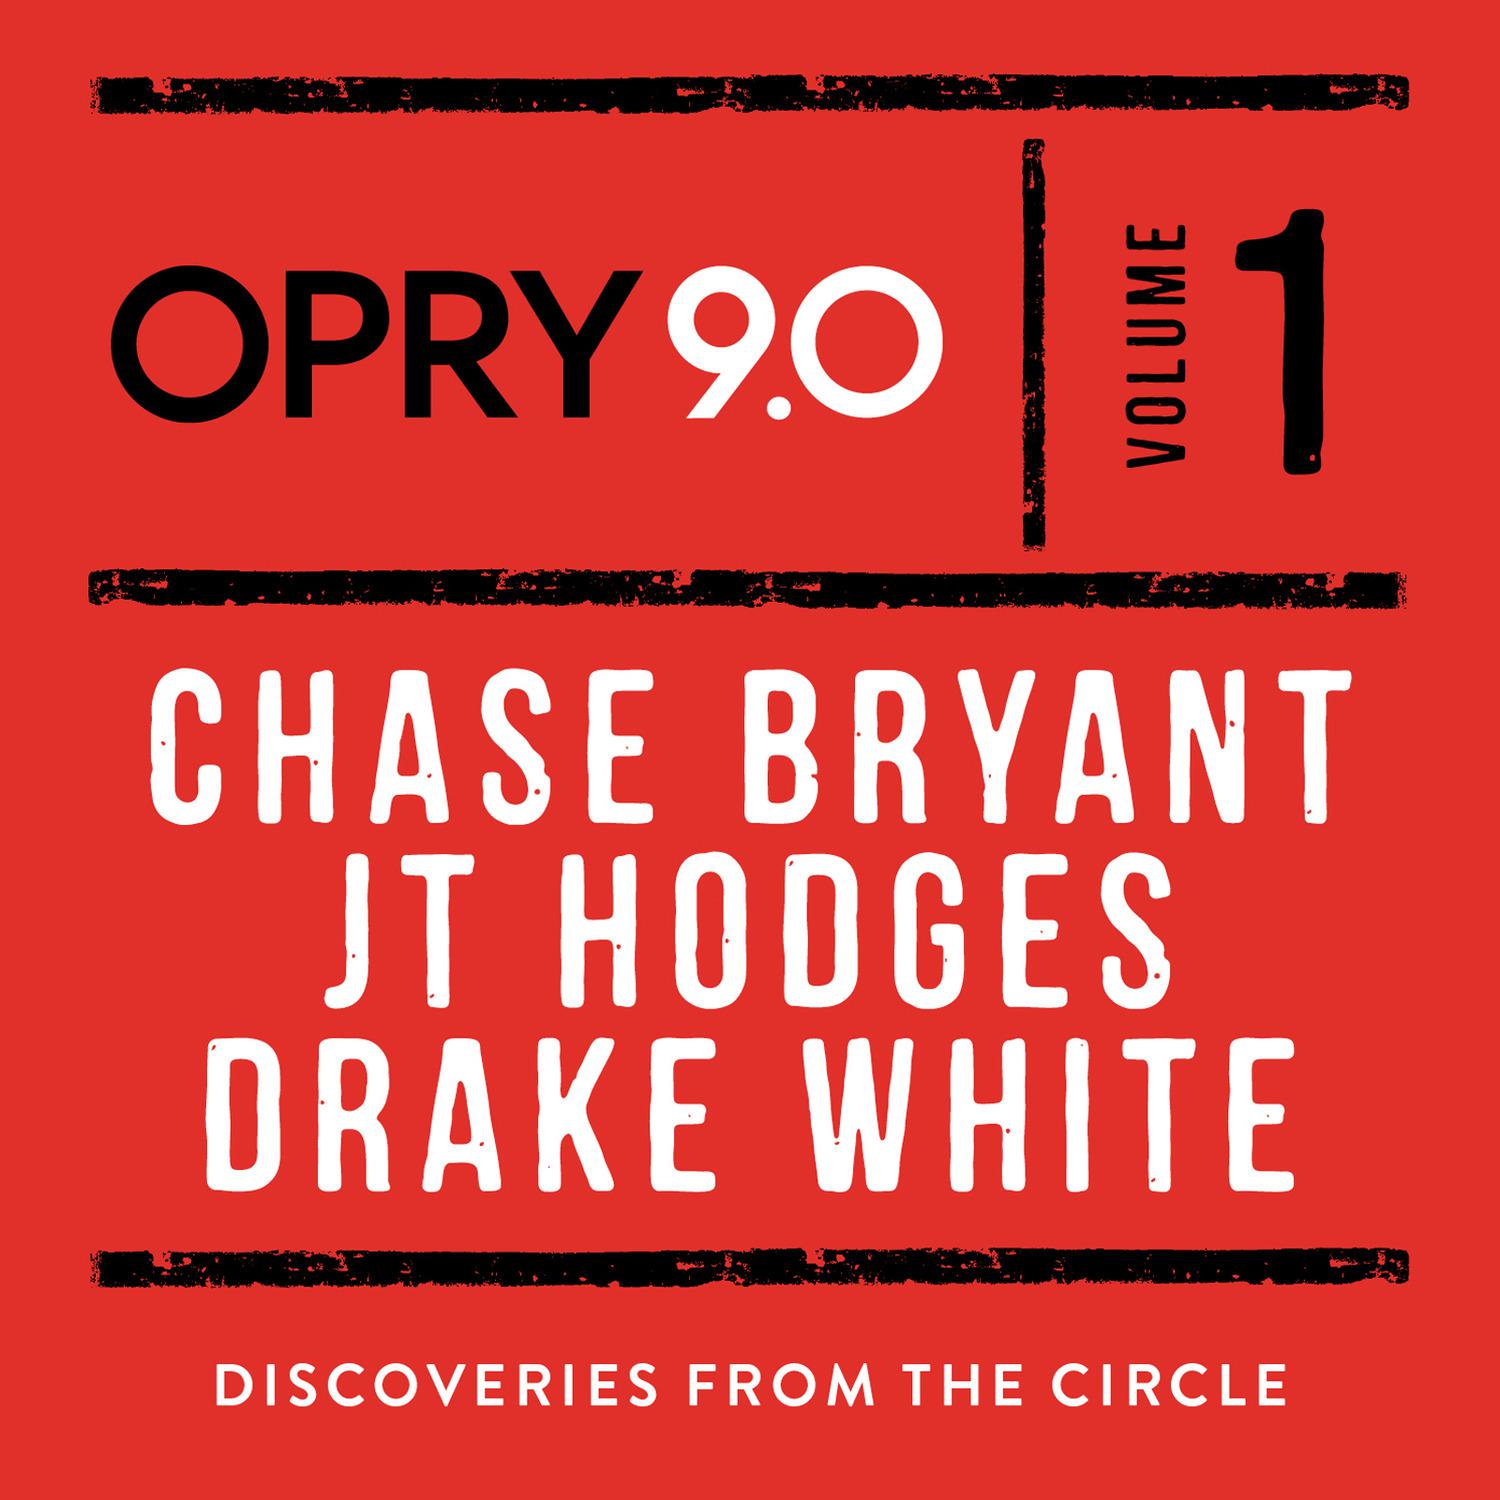 Drake White - Back to Free (Live at the Grand Ole Opry)